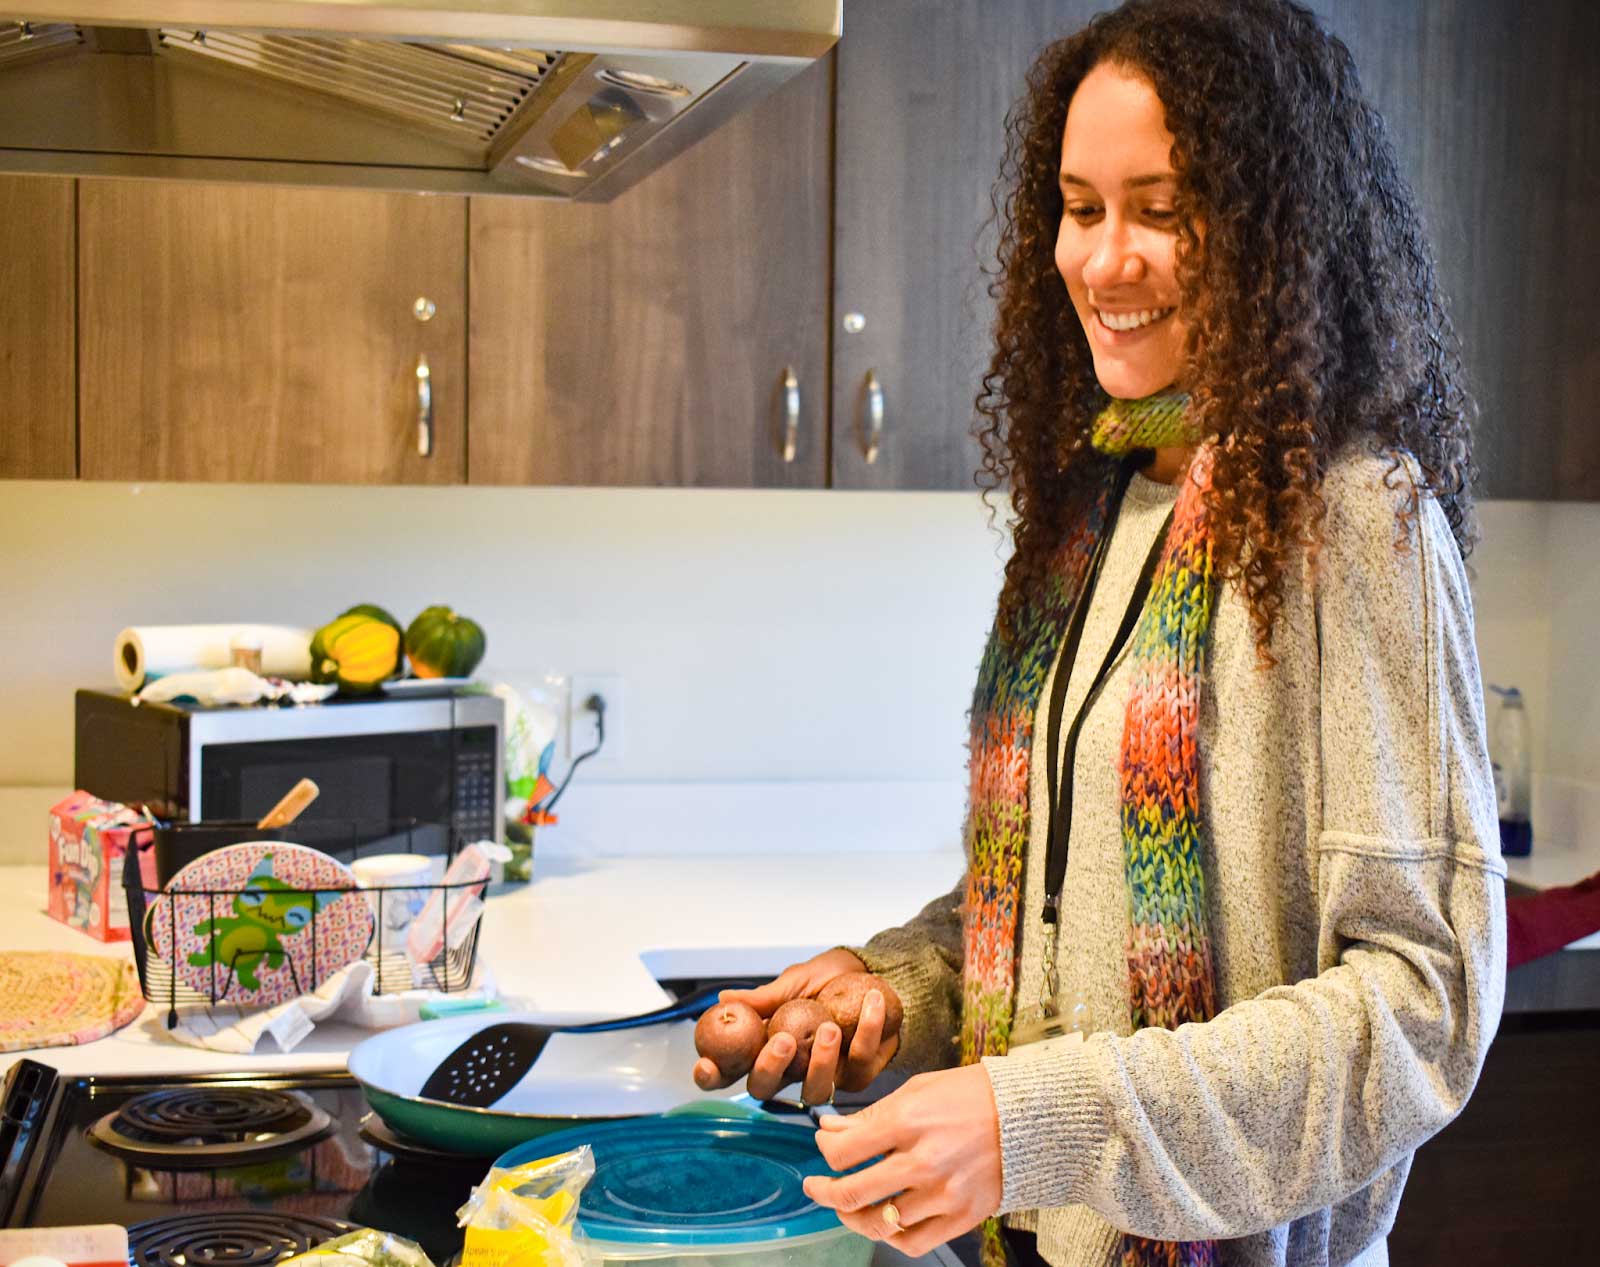 A smiling staff member prepares food in a kitchen.